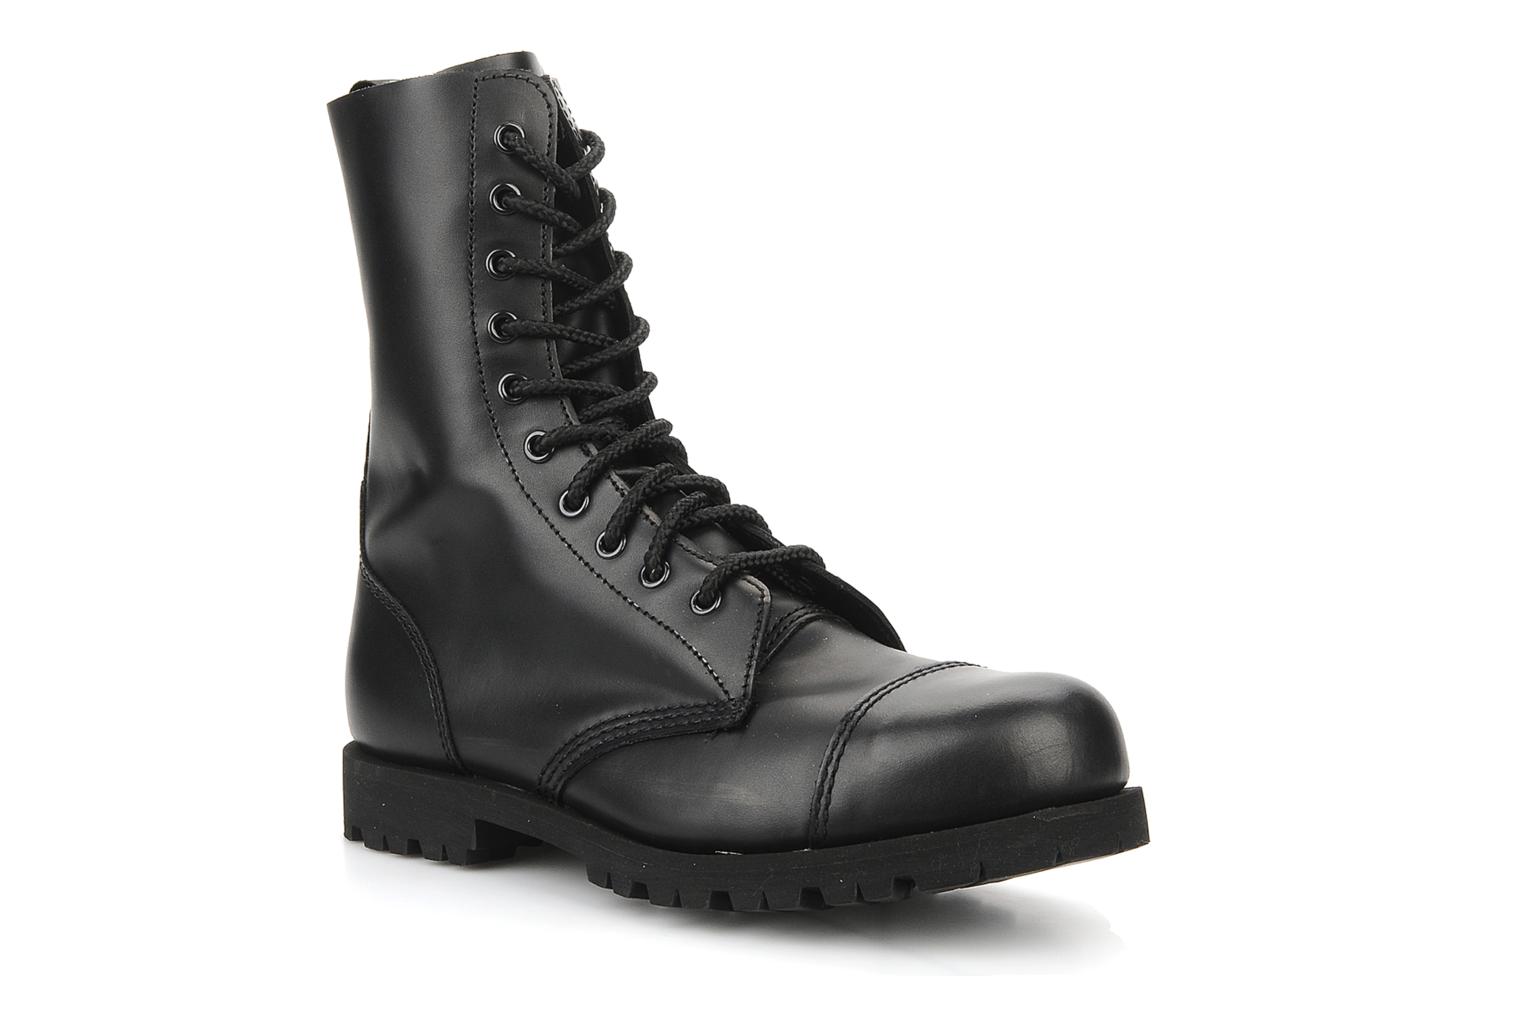 Dr. Martens Getta grip 2a77 Ankle boots in Black at Sarenza.co.uk (79429)